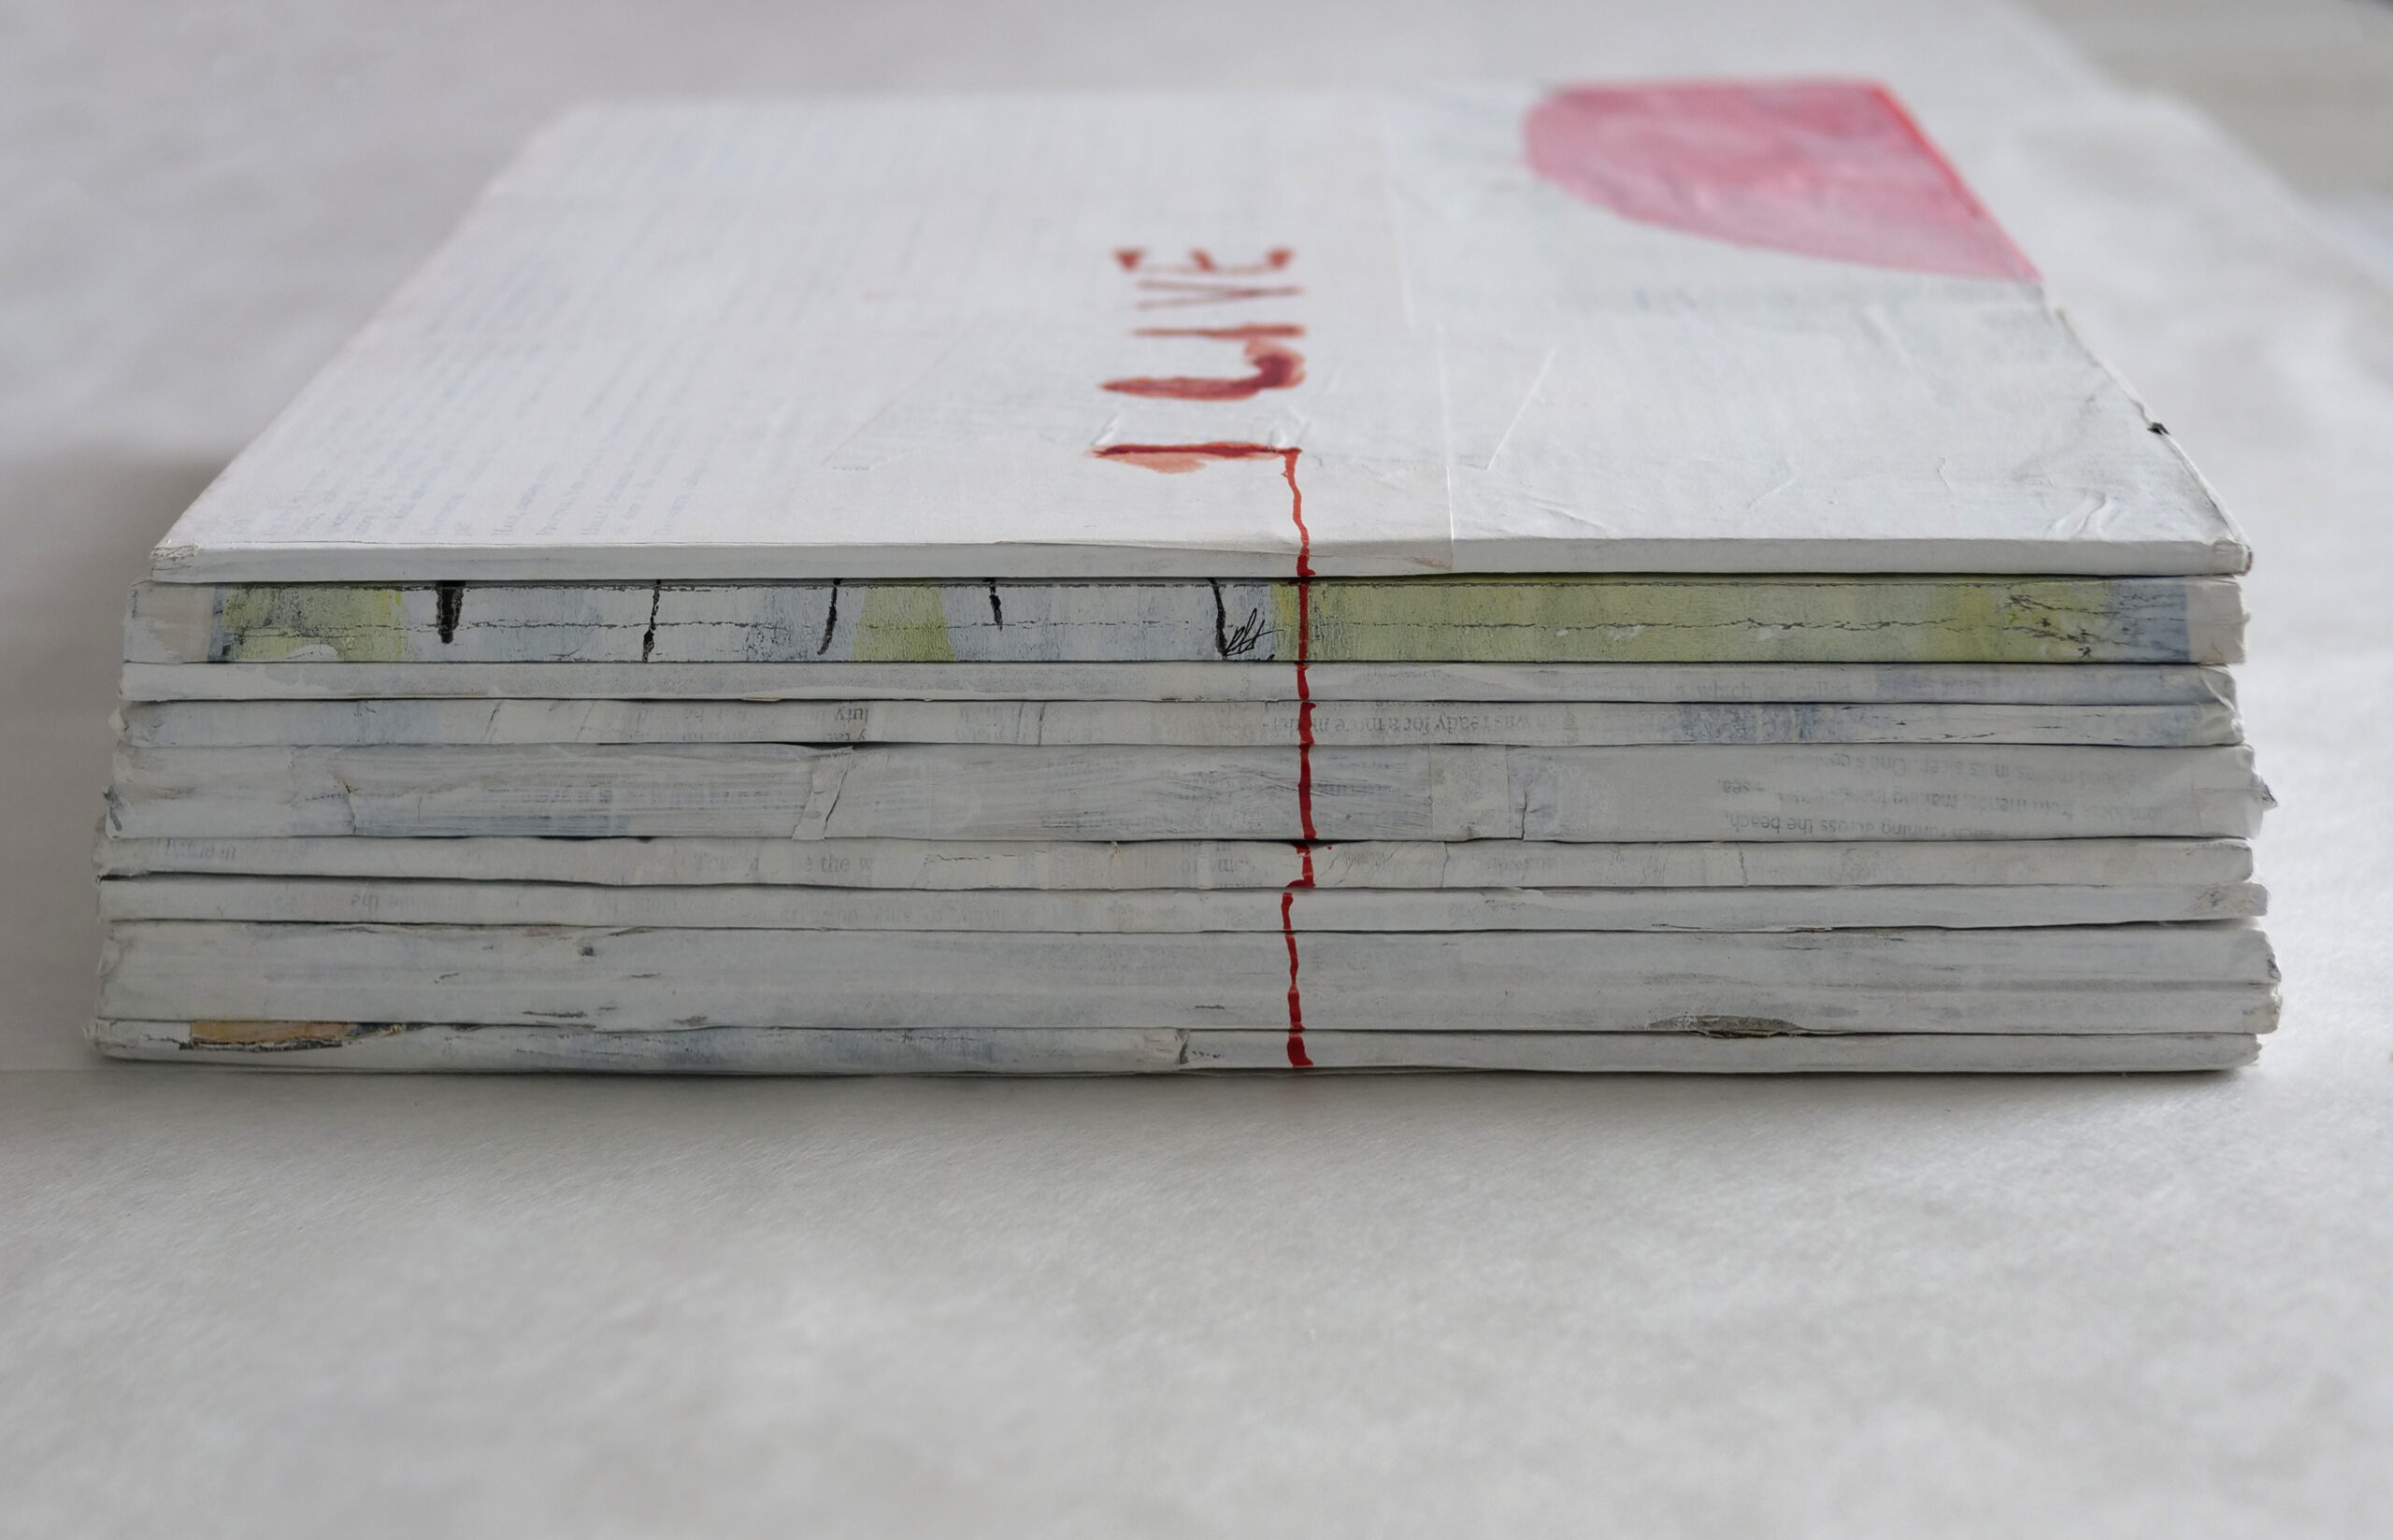 Sculptural artwork, possibly a book photographed with the spine in the foreground laying down